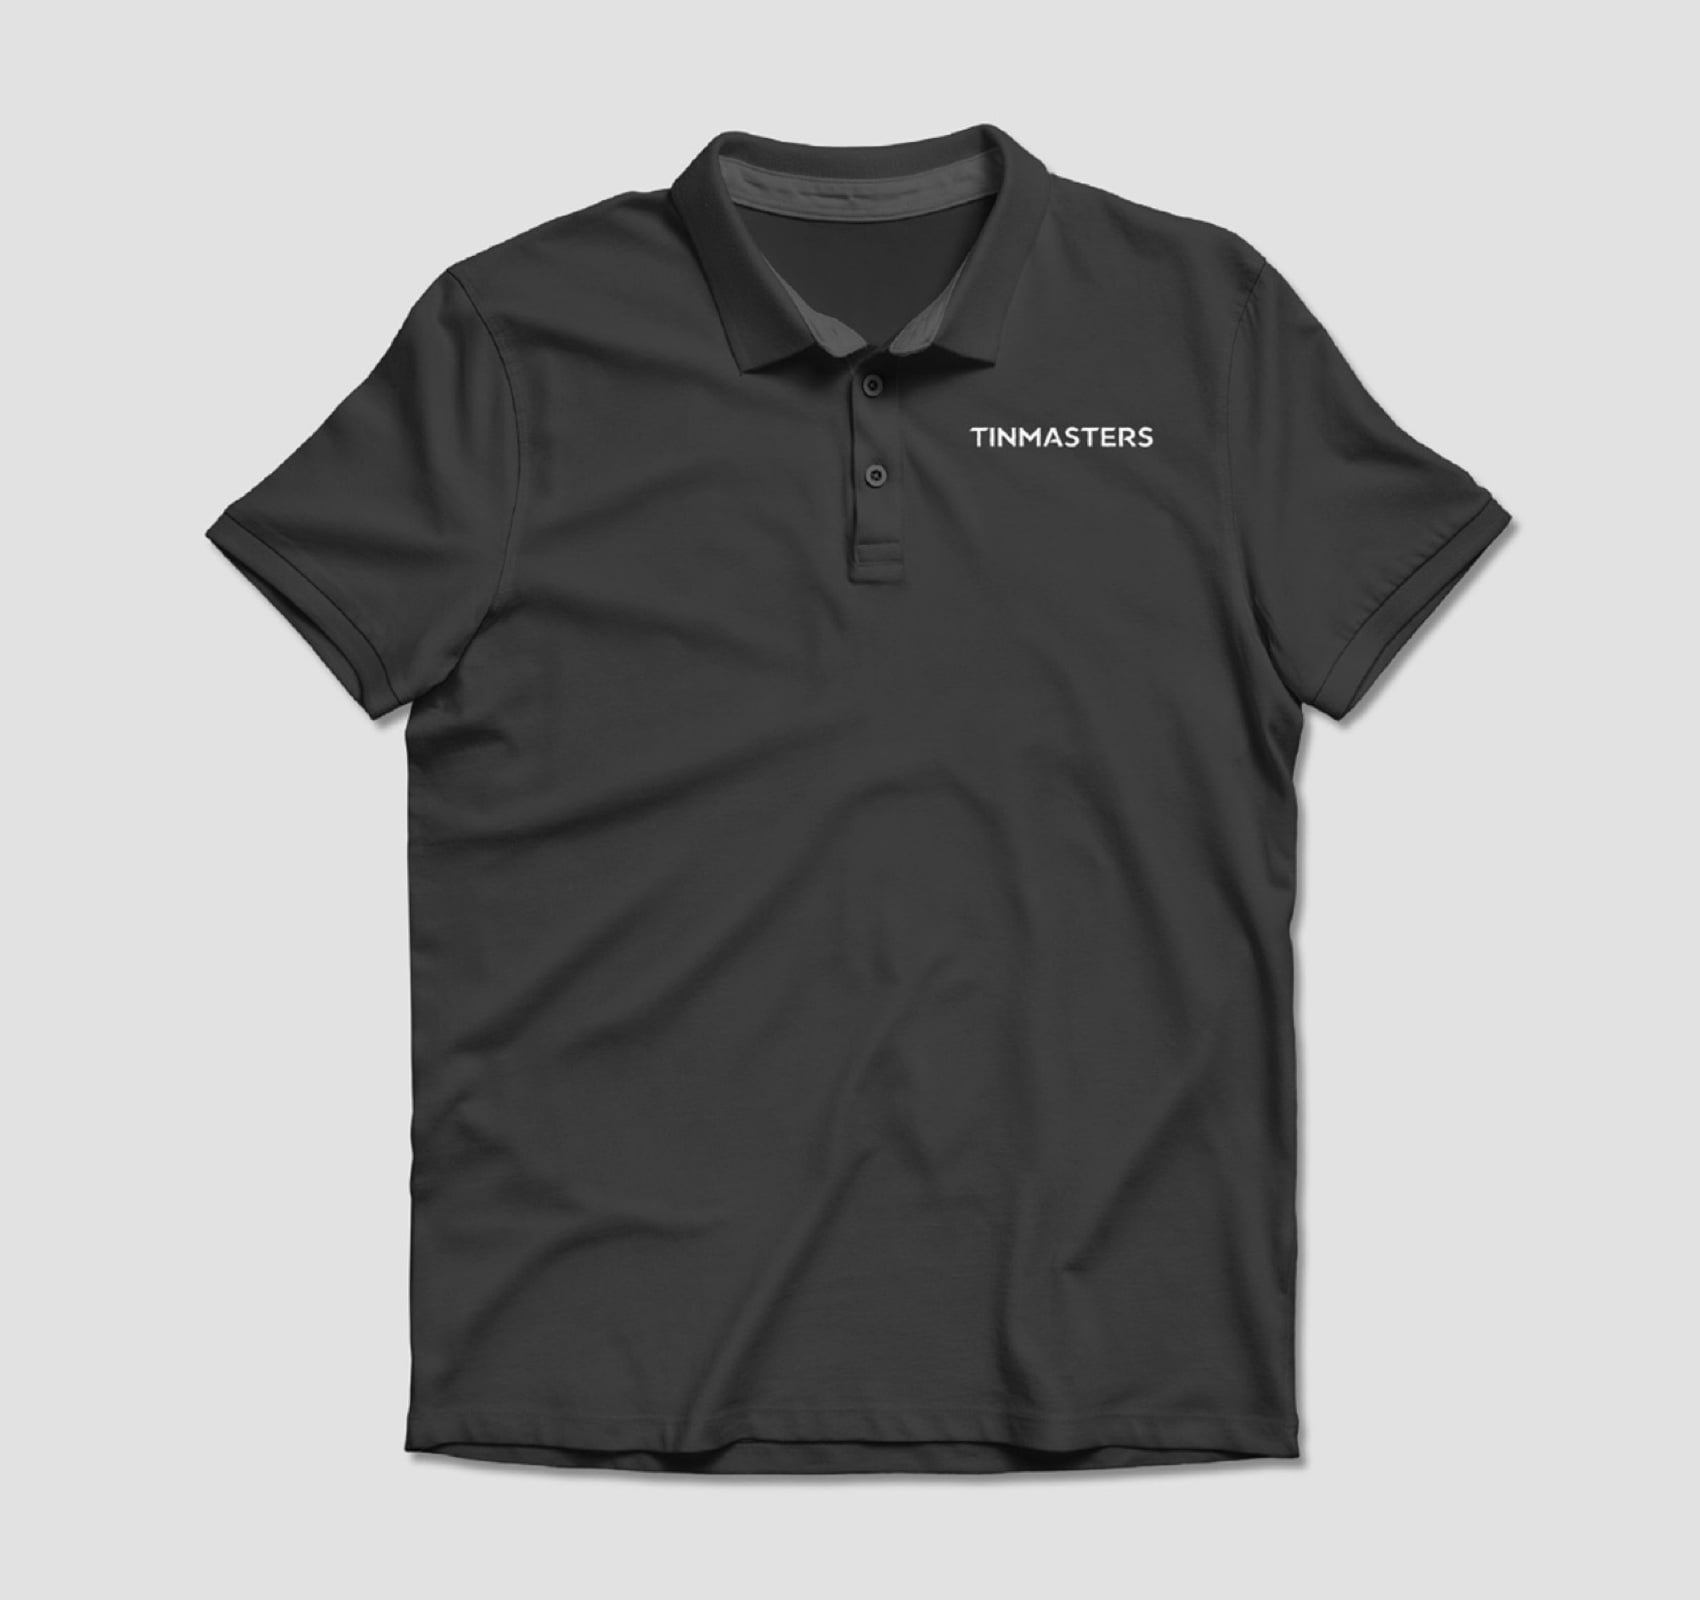 New branded workwear for the Tinmasters